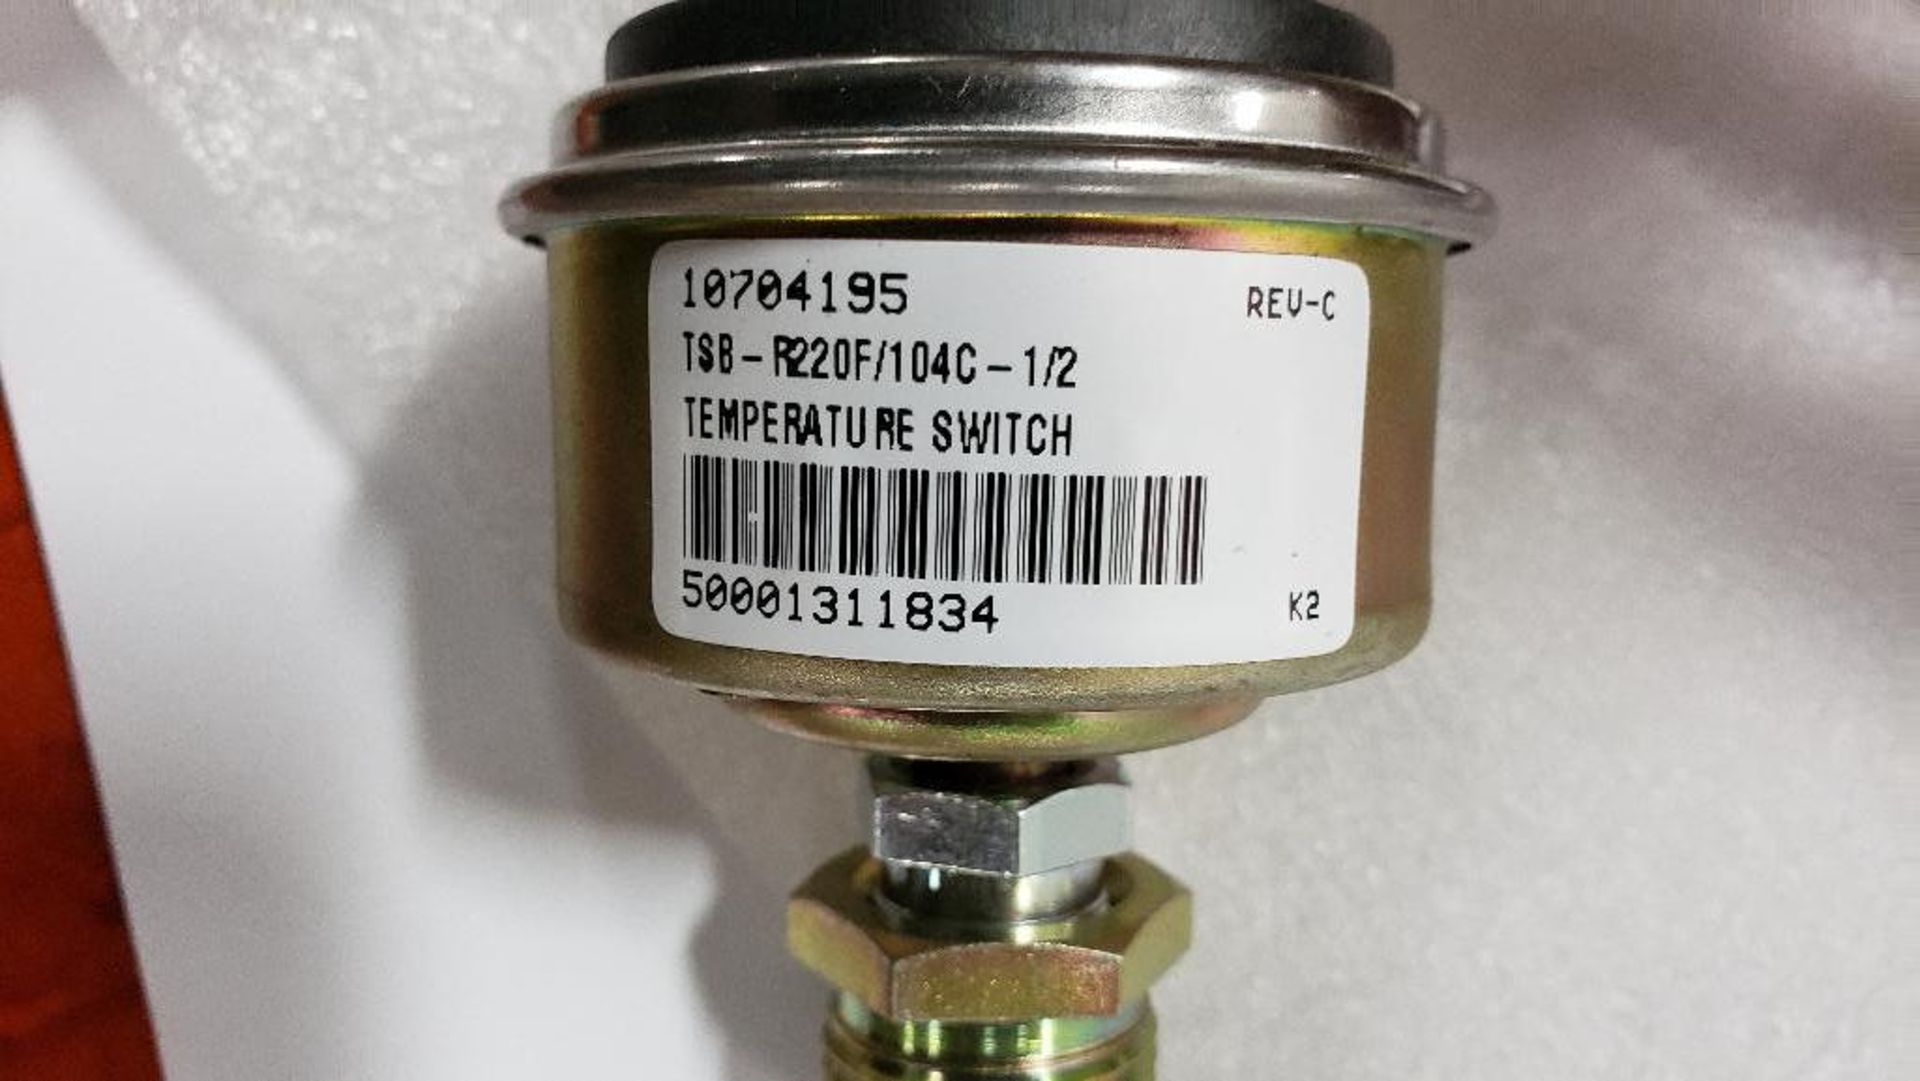 Qty 8 - Murphy Enovation Controls temperature switch. Catalog number TSB-R220F/104C-1/2. New in box. - Image 3 of 4